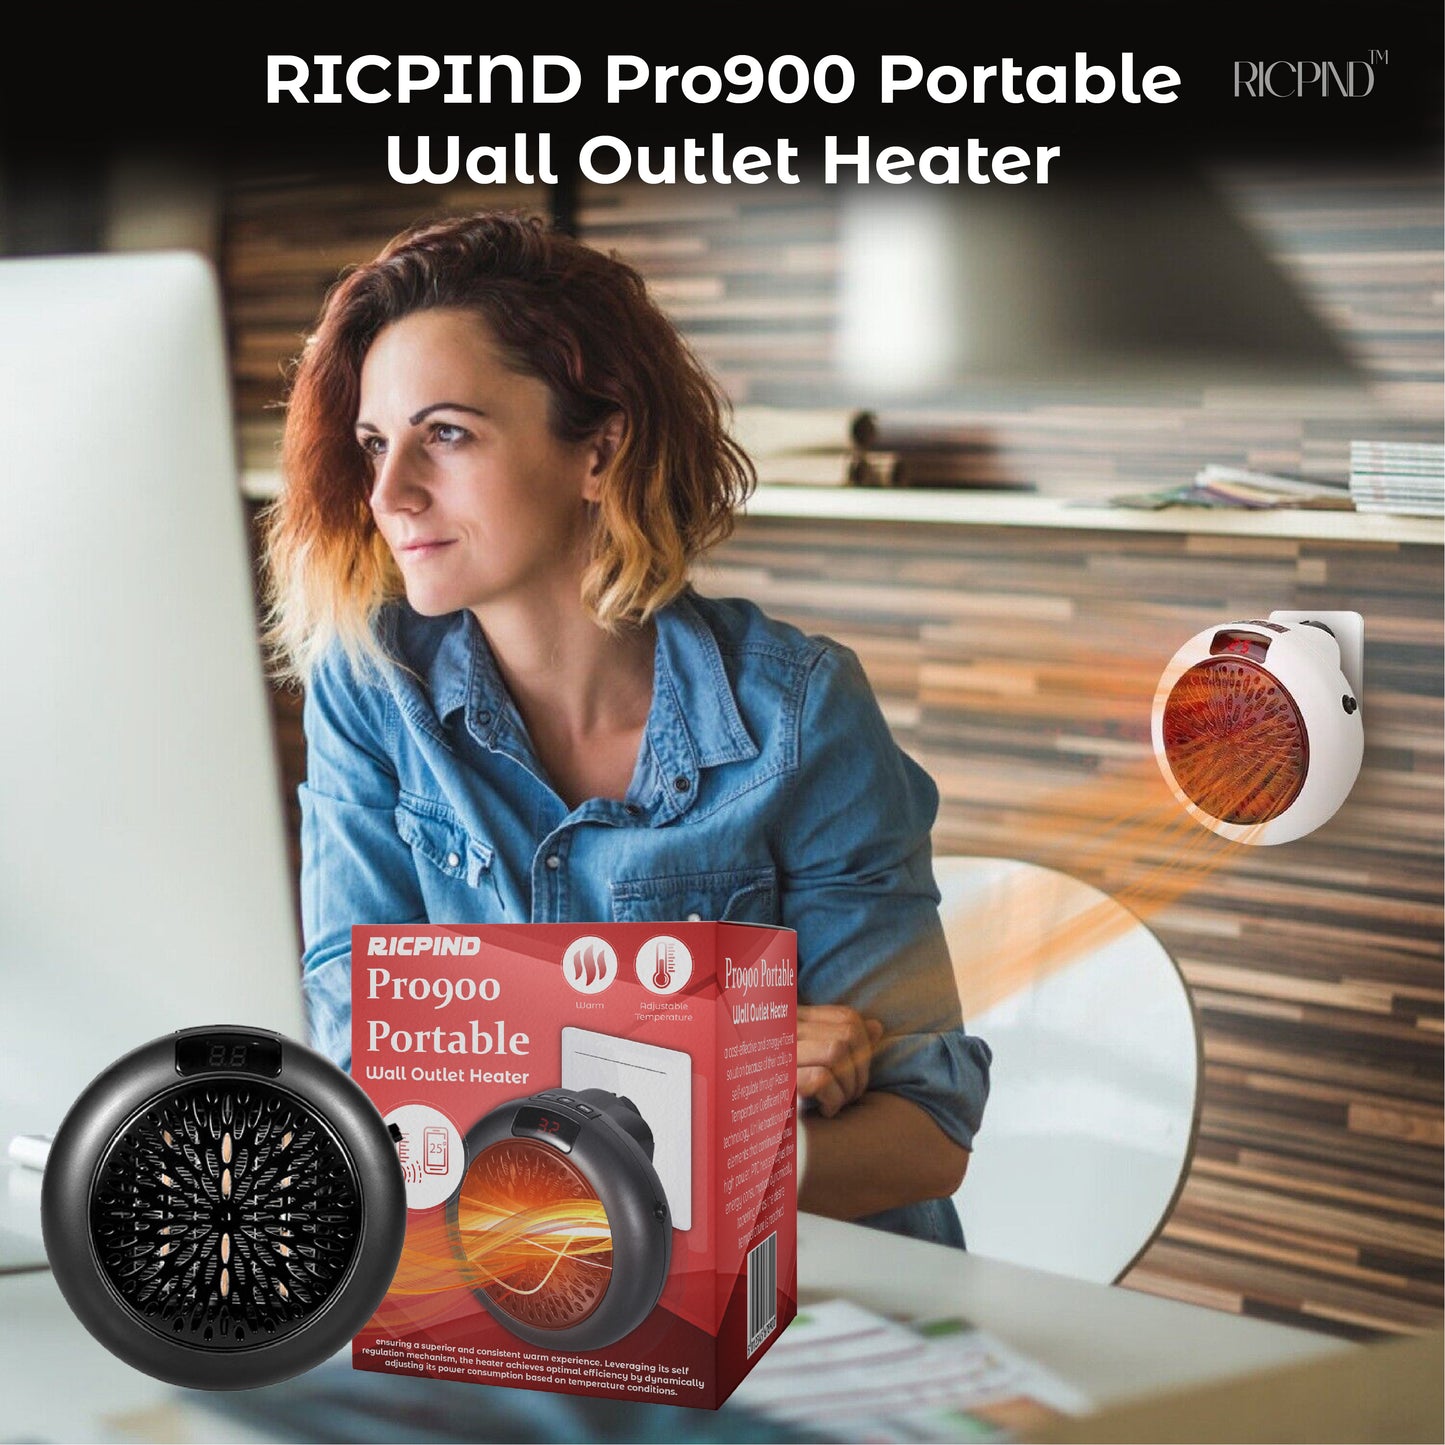 RICPIND Pro900 Portable Wall Outlet Heater